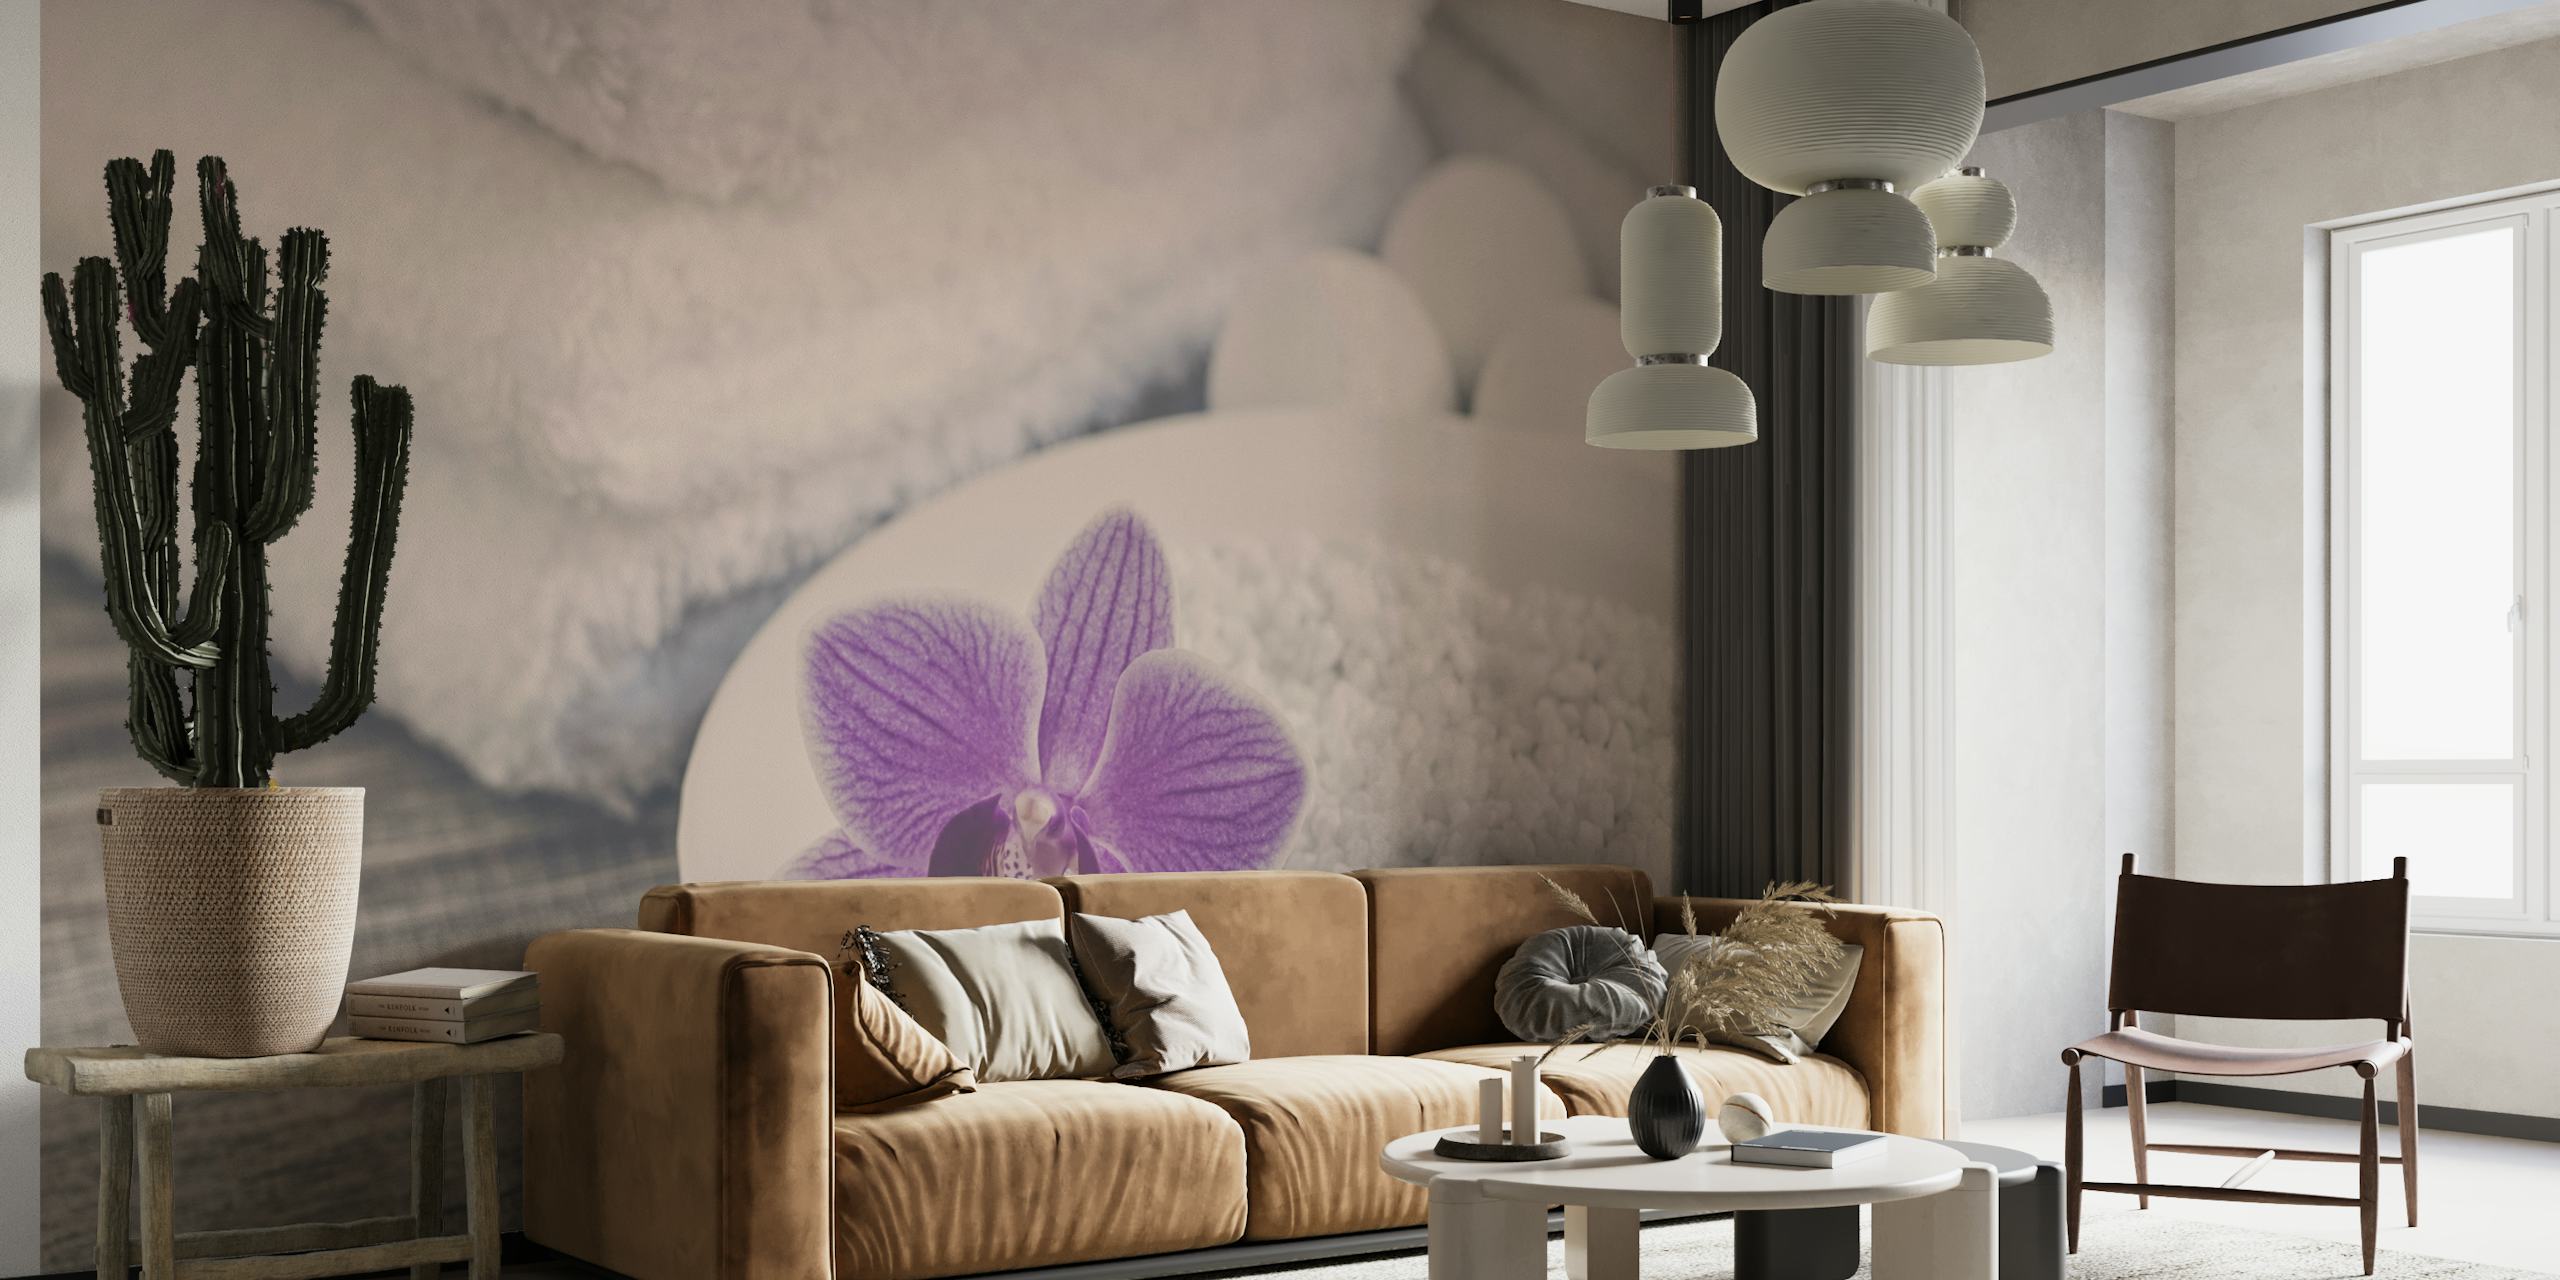 Wall mural with a purple orchid on white sand, fluffy towels in background